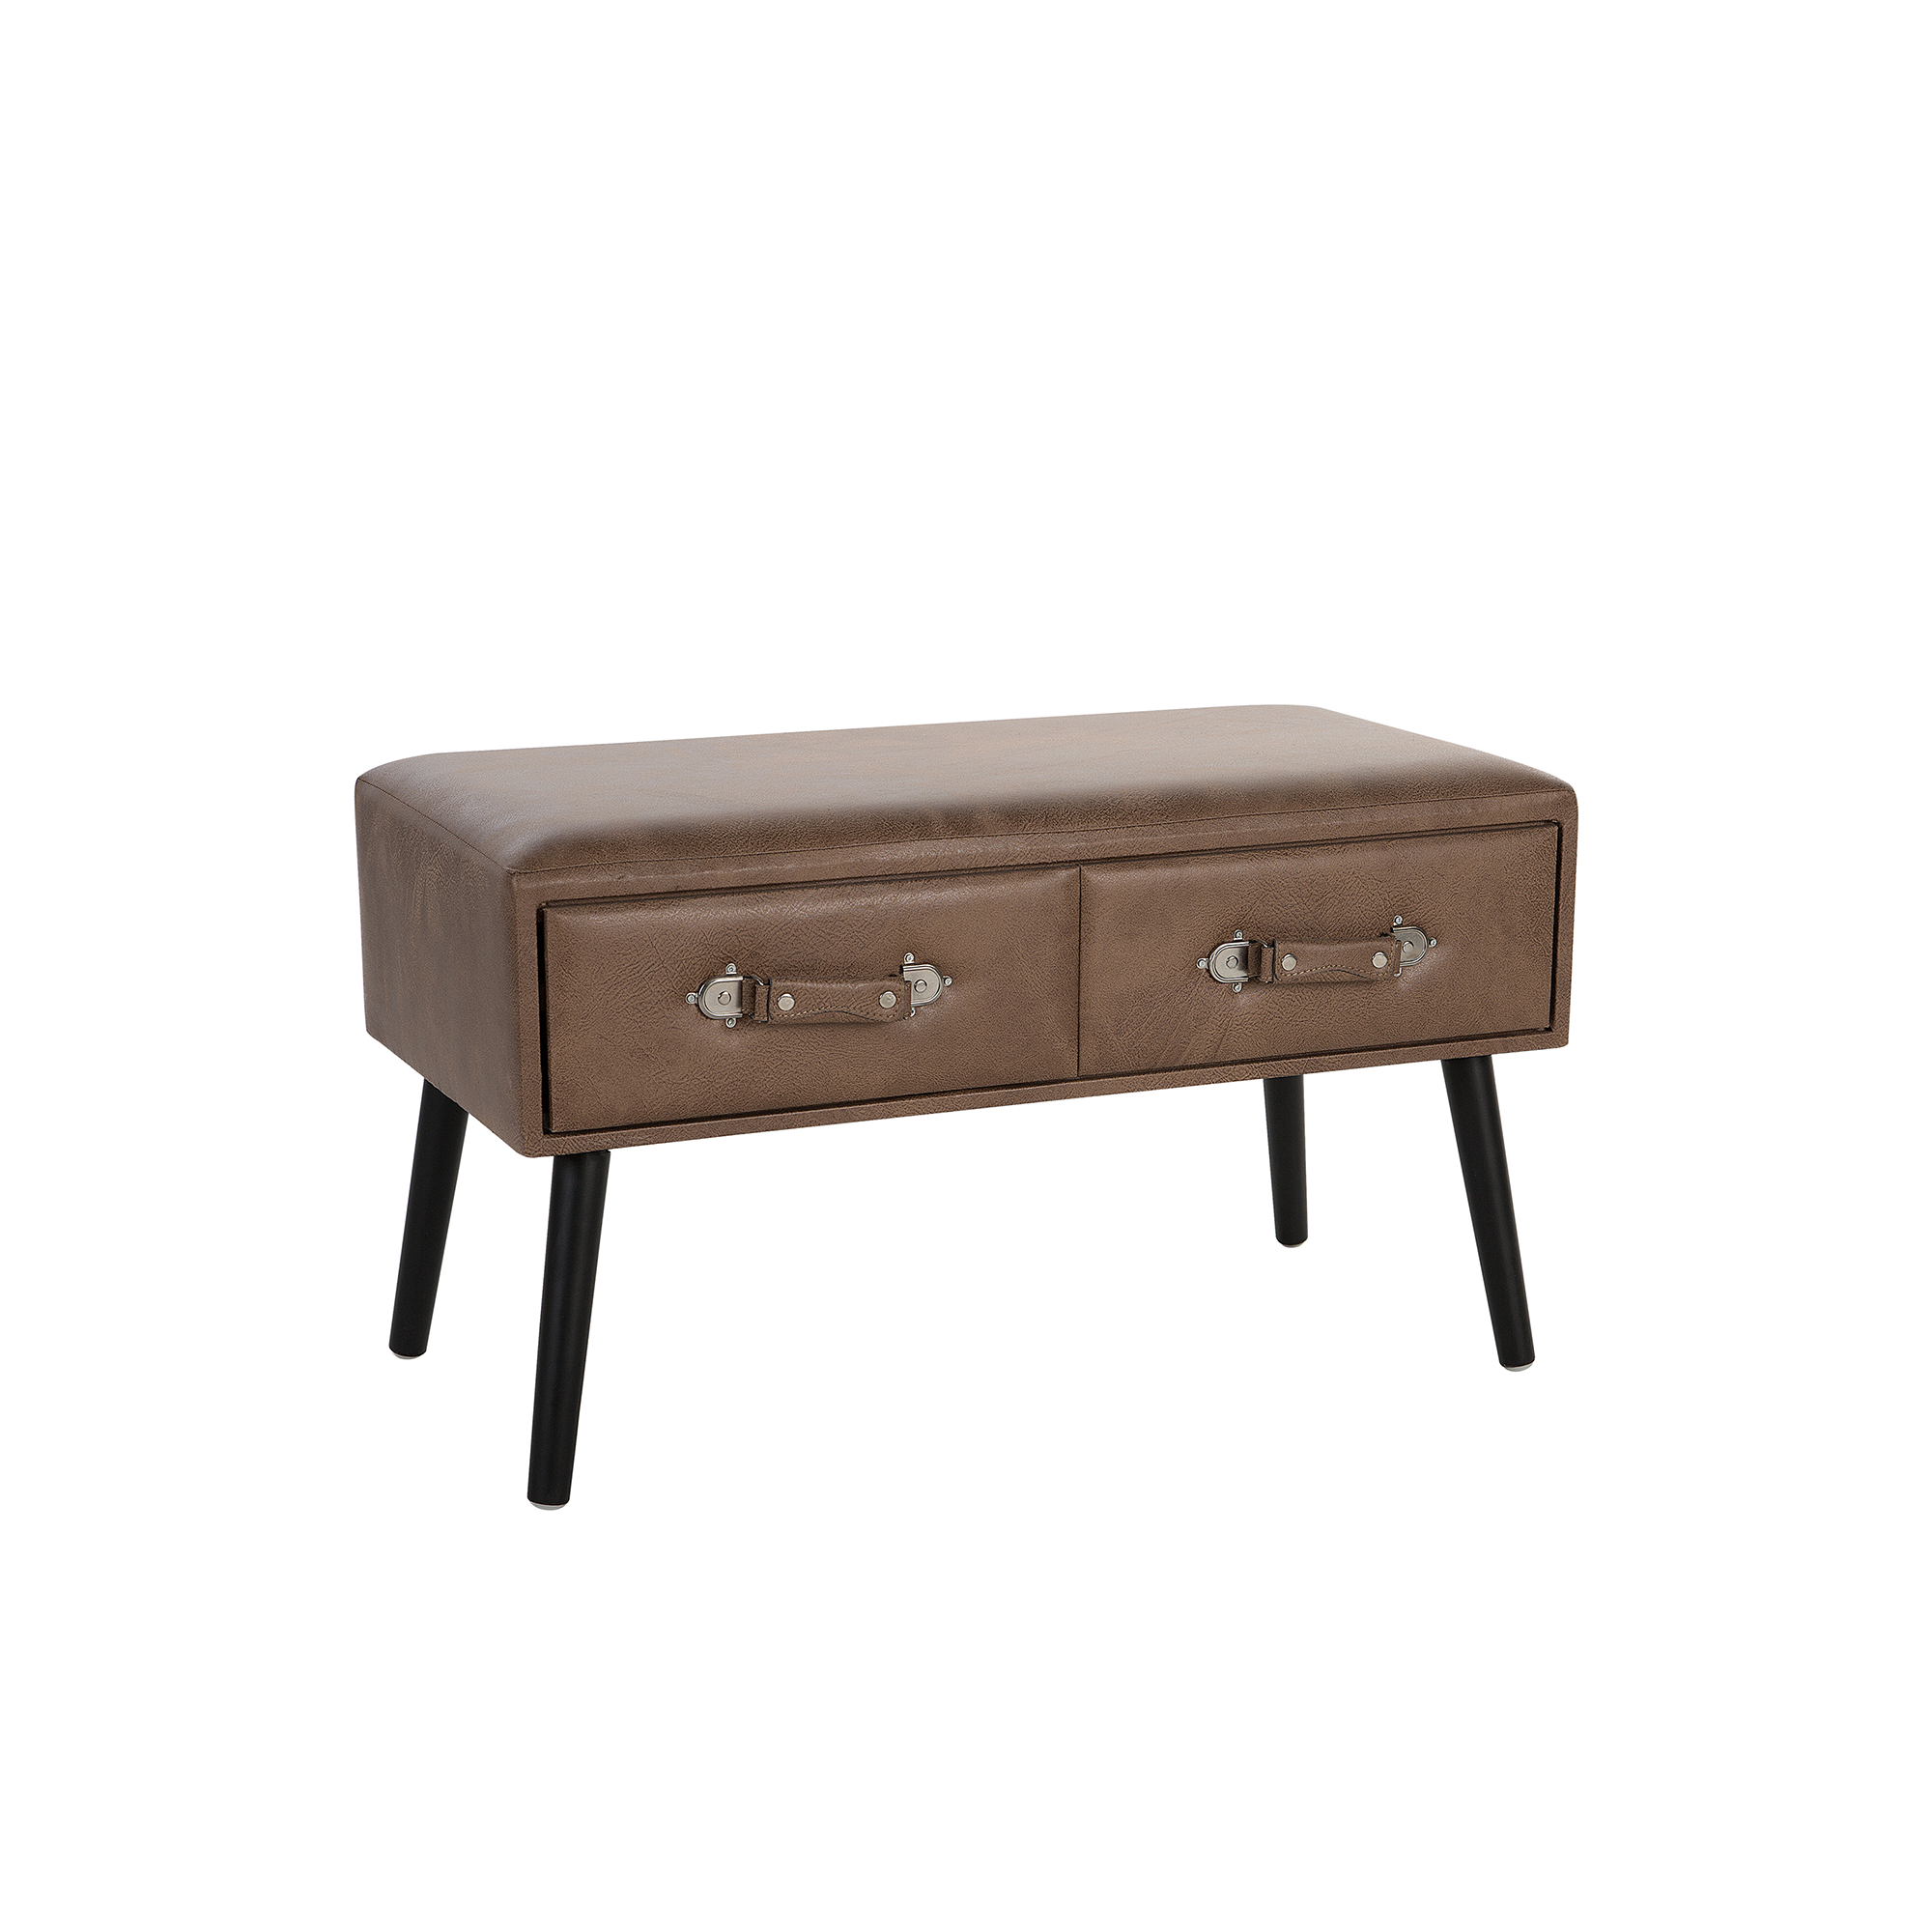 Beliani Coffee Table with 2 Storage Drawers Brown Faux Leather Upholstery Suitcase Design